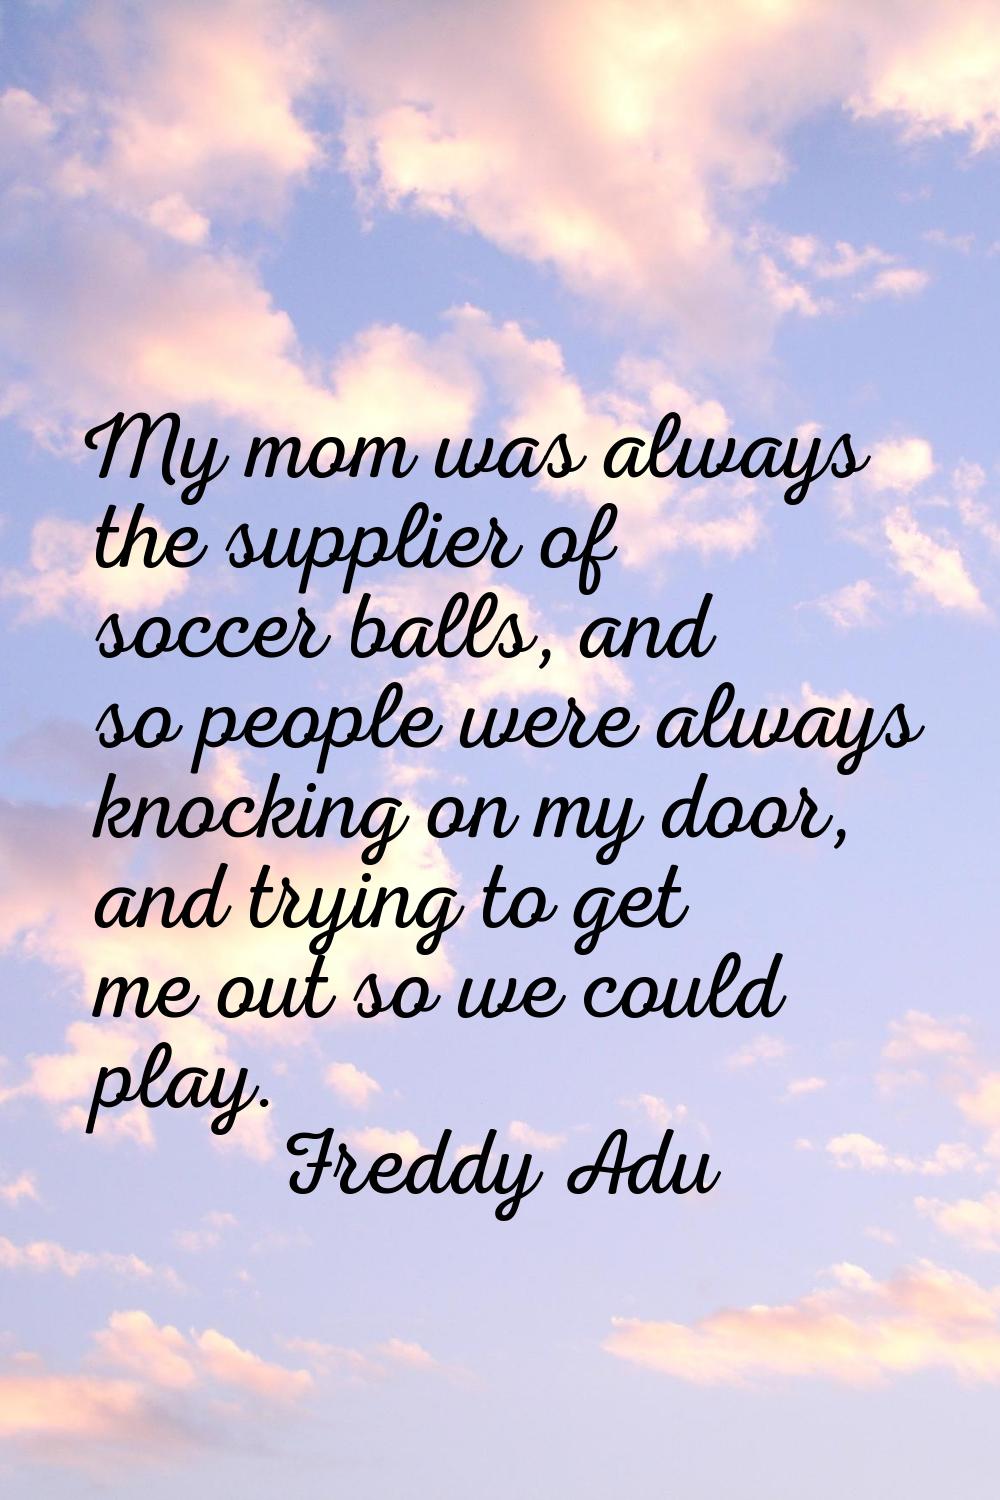 My mom was always the supplier of soccer balls, and so people were always knocking on my door, and 